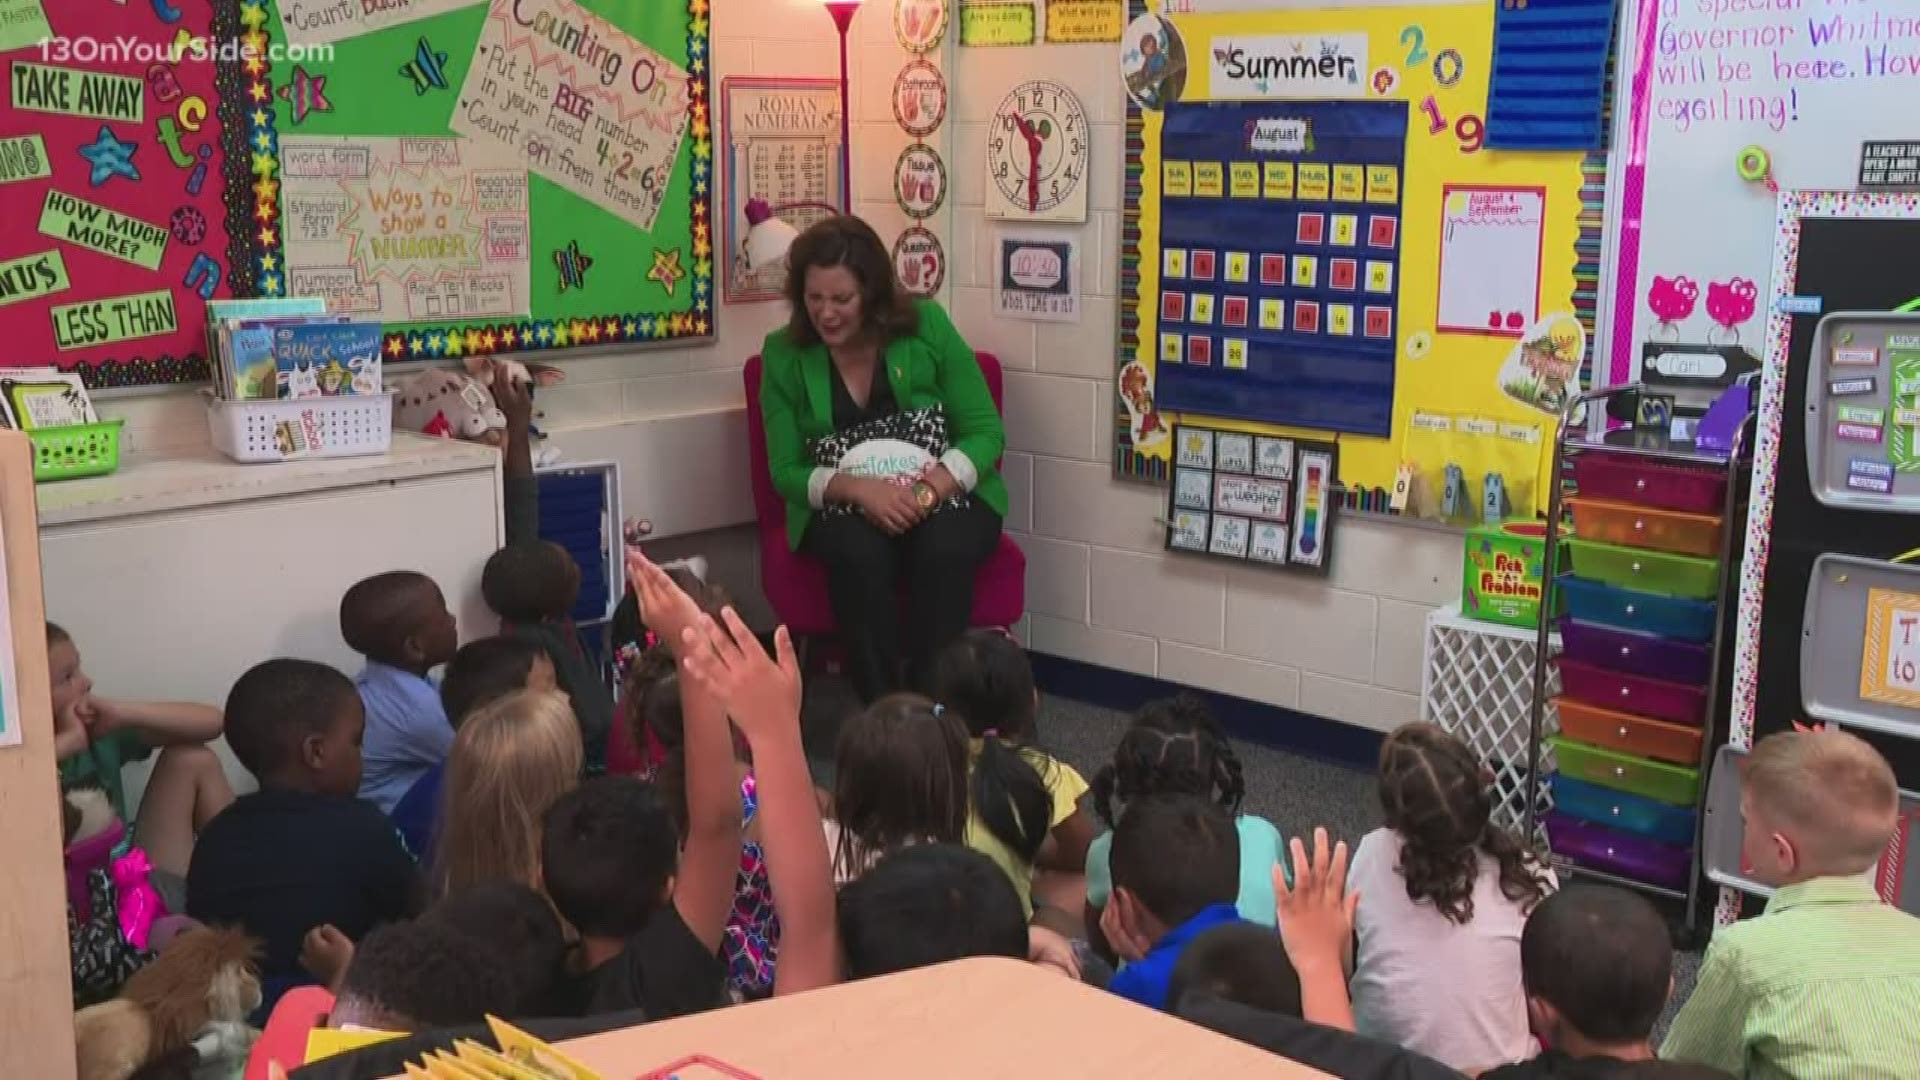 Gov. Gretchen Whitmer was at Meadowlawn Elementary to meet with students and staff on their second day of school. She used the opportunity to highlight her 2020 budget, which includes the largest funding increase in Michigan schools in a generation of students.